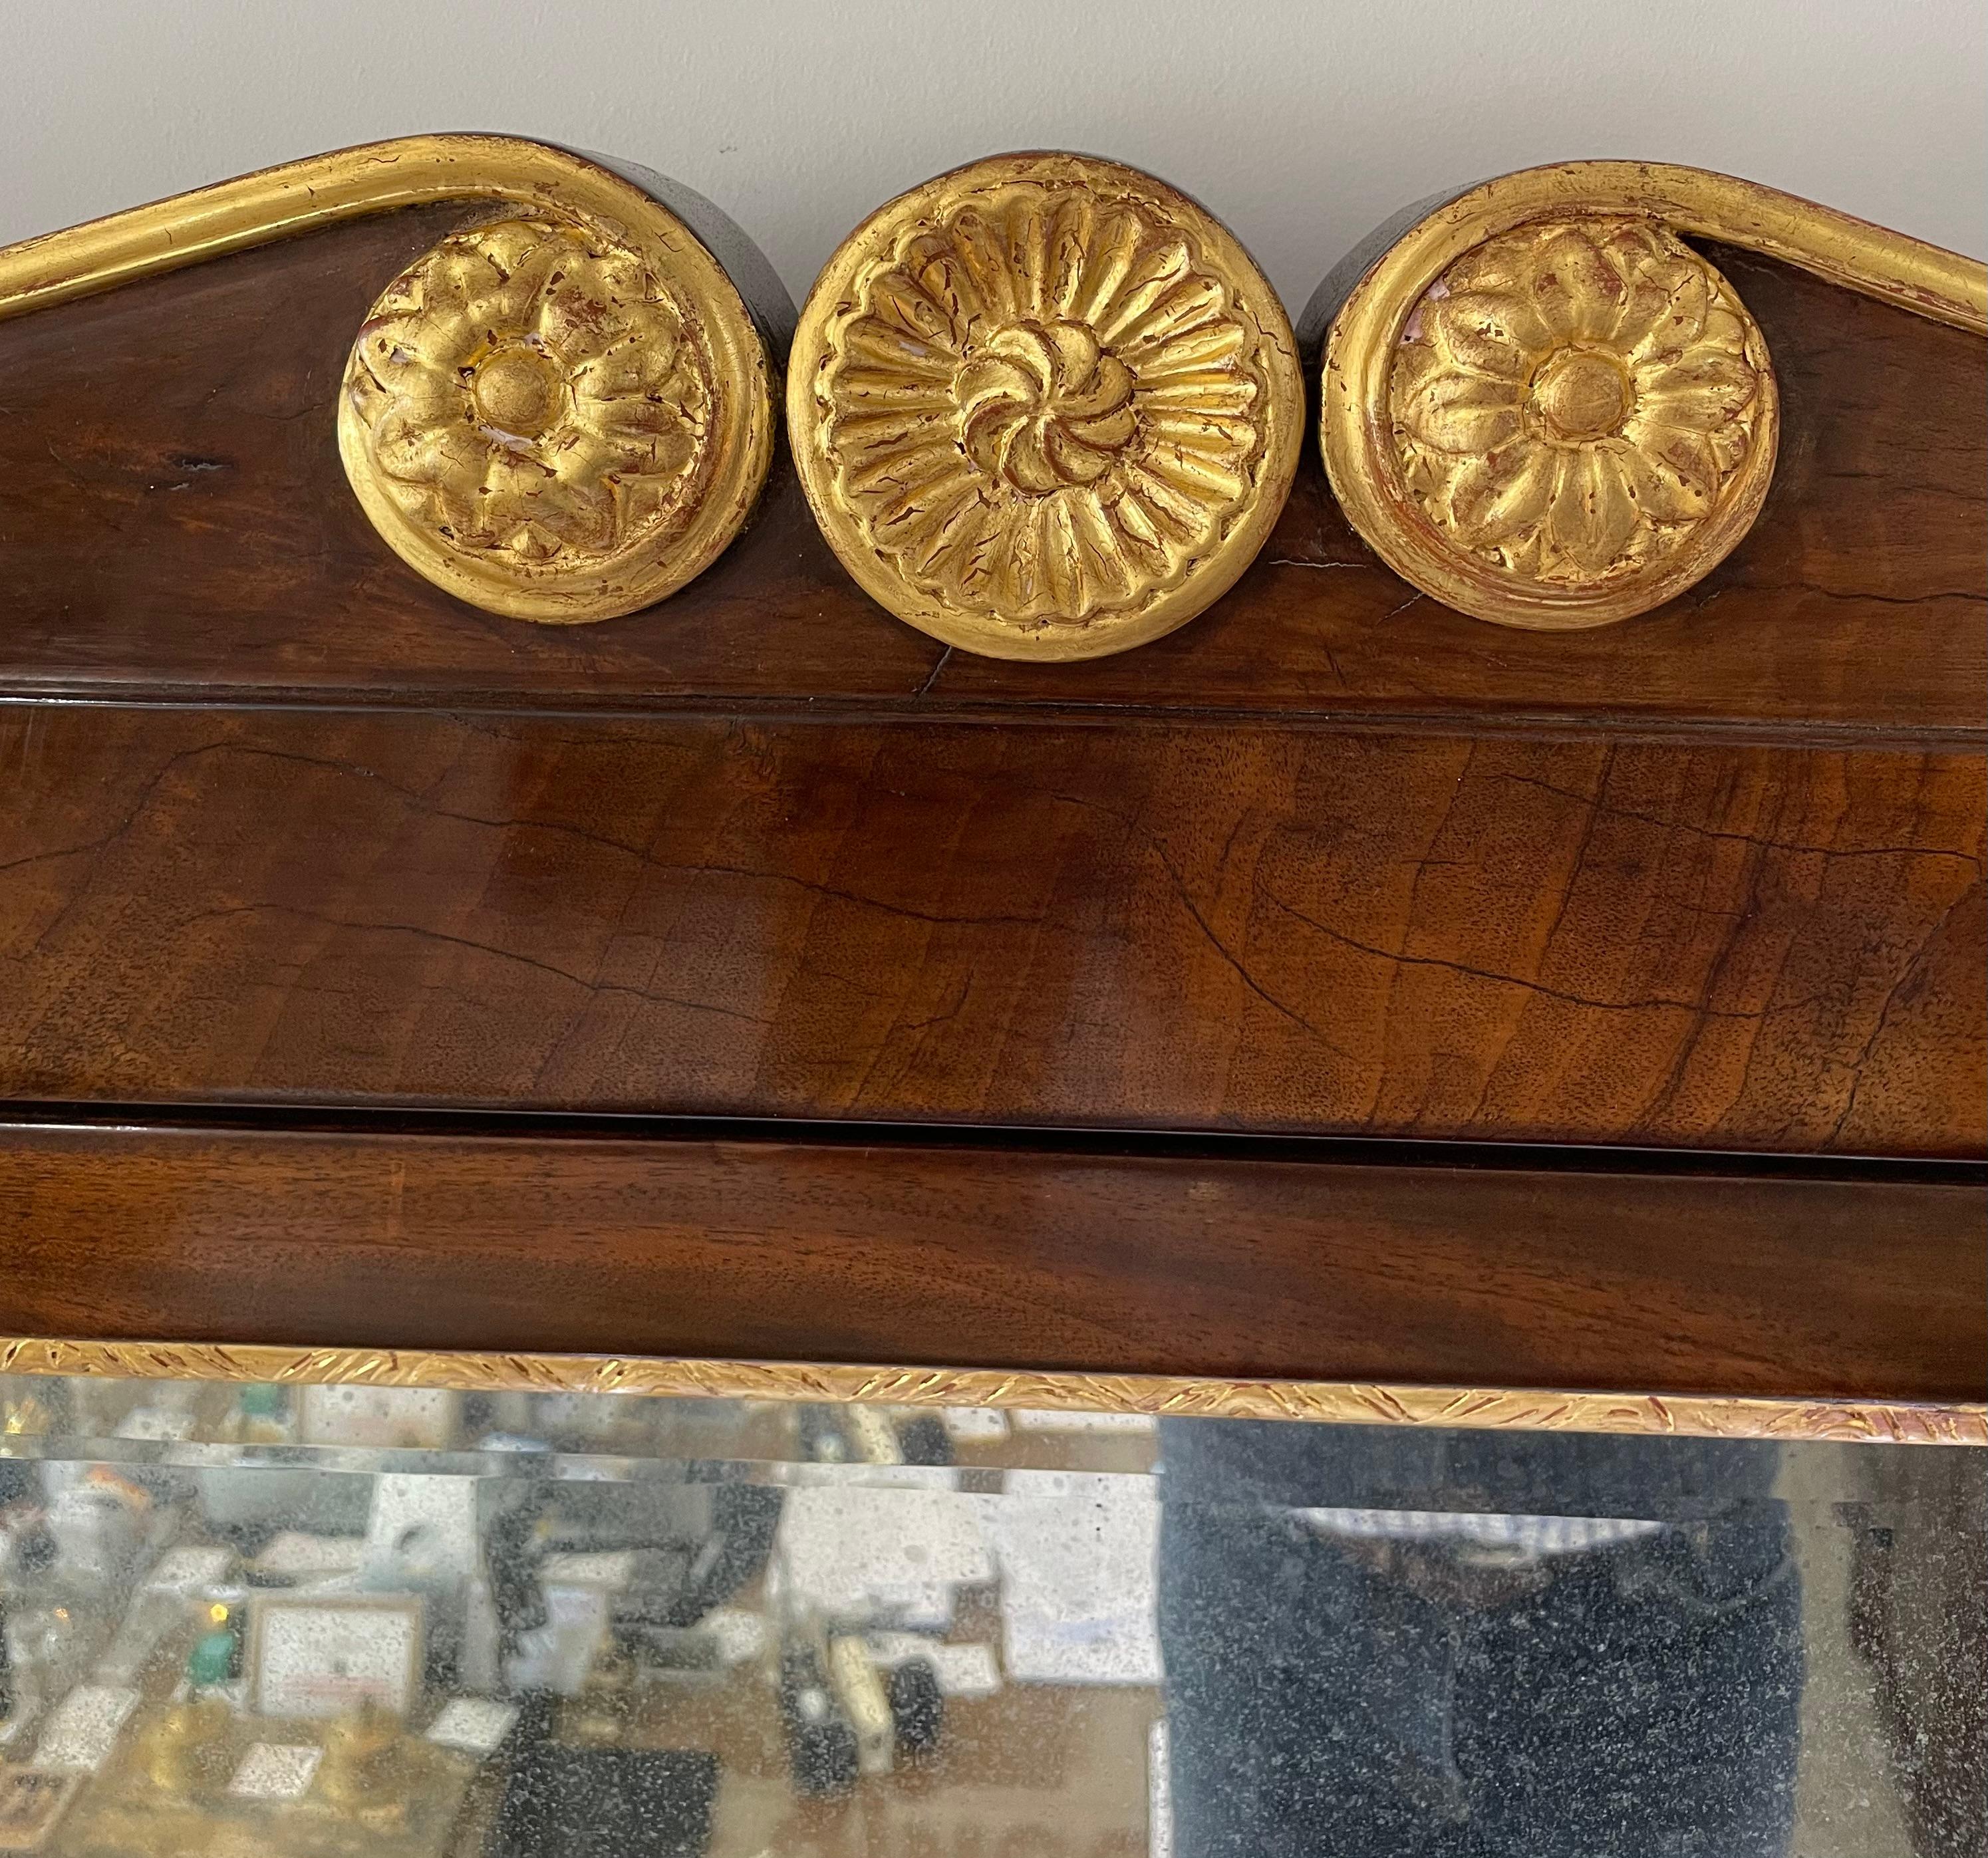 This stylish and chic Napoleon III style console with mirror was acquired from a Palm Beach estate and it will make a statment with it scale, form and use of materials.  The piece is fabricated in mahogany wood, carrara marble and gilt gold leaf.